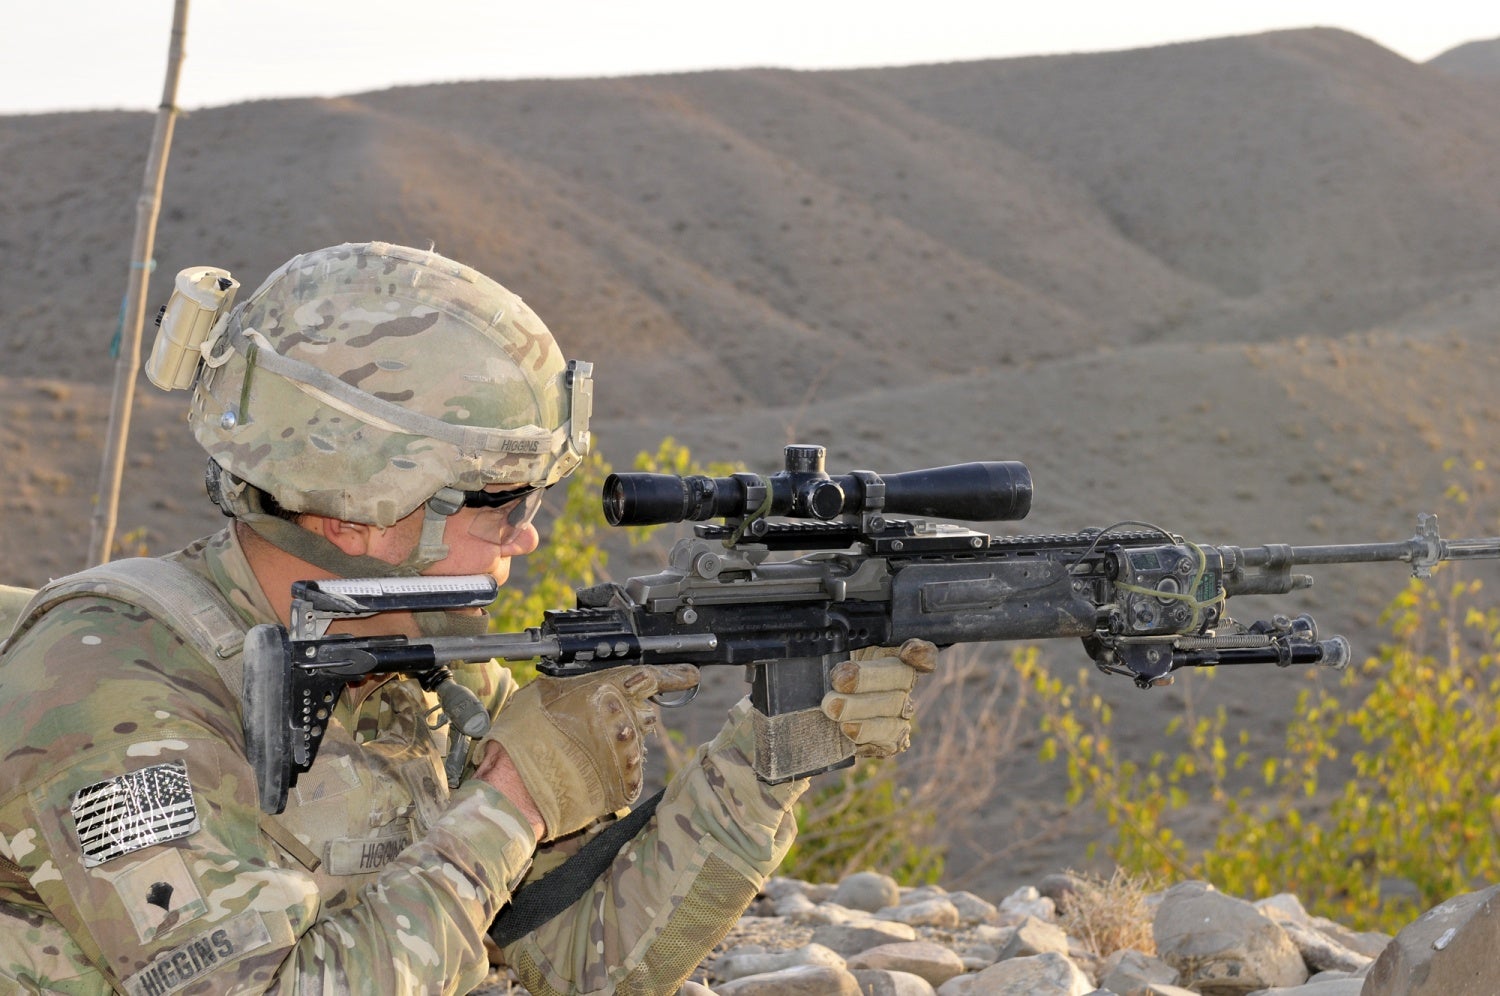 Recent updates to the Compact Semi Automatic Sniper System (CSASS) offer so...